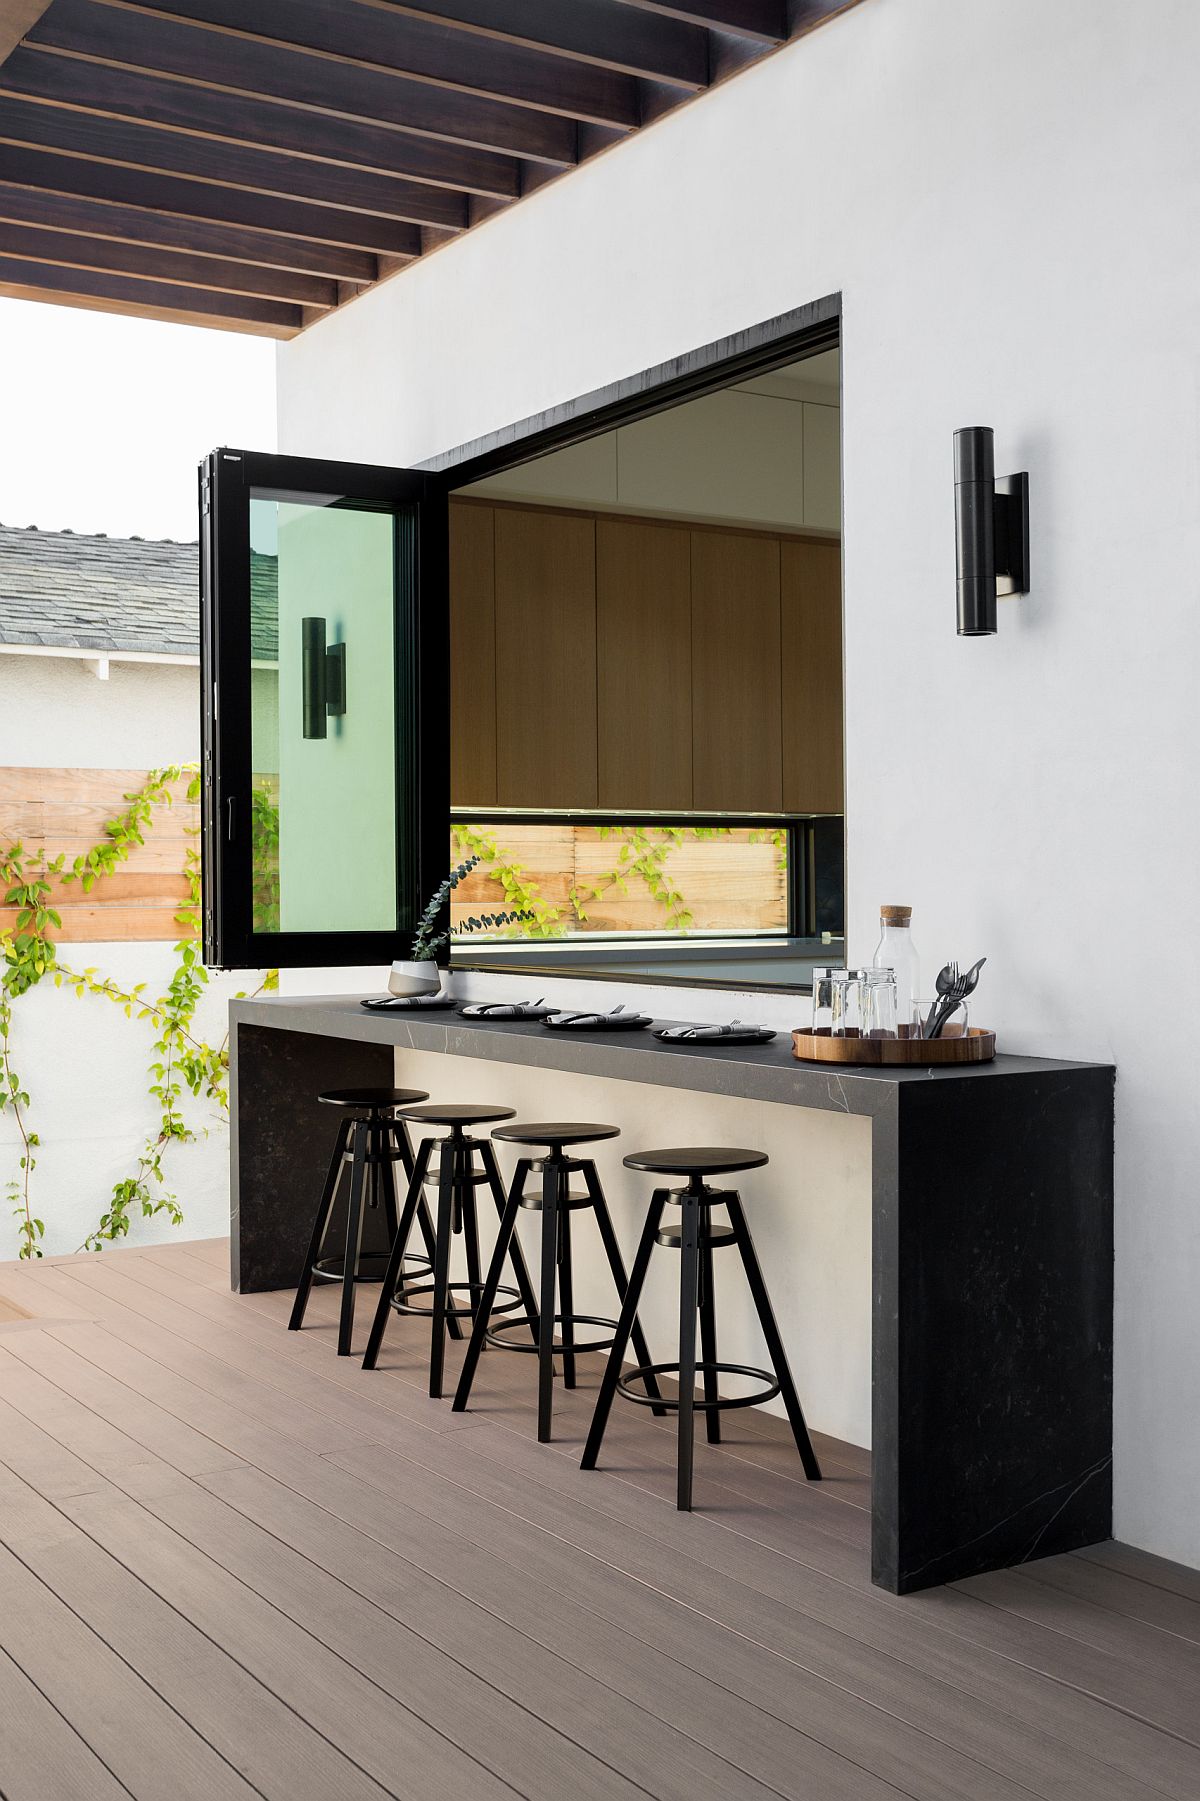 Window-connects-the-kitchen-inside-the-house-connects-the-home-with-the-outdoor-kitchen-65214